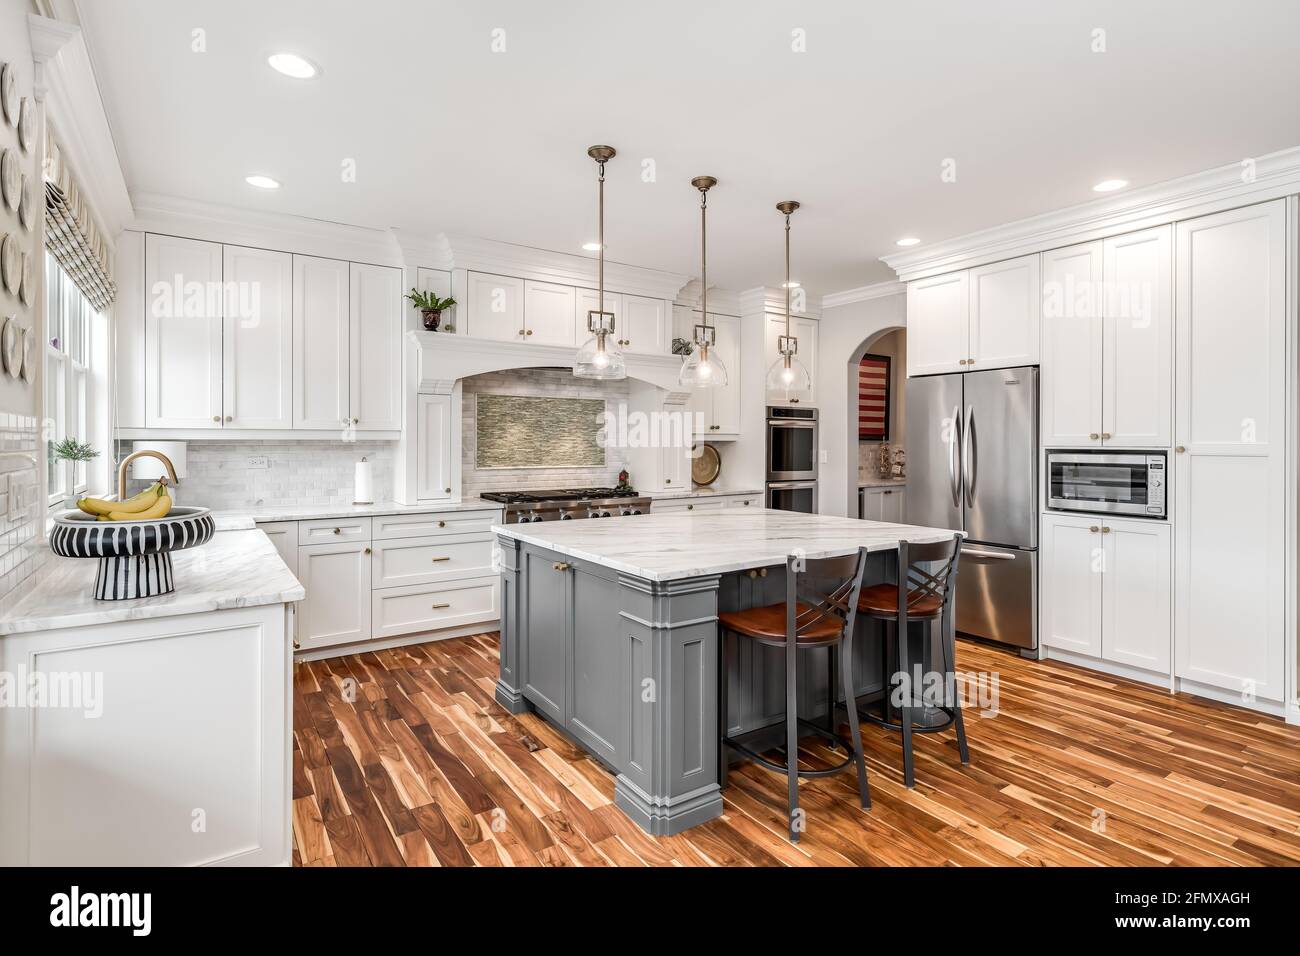 https://c8.alamy.com/comp/2FMXAGH/a-luxurious-white-kitchen-with-a-granite-counter-top-and-a-tiled-backsplash-behind-the-stainless-steel-kitchenaid-stovetop-2FMXAGH.jpg